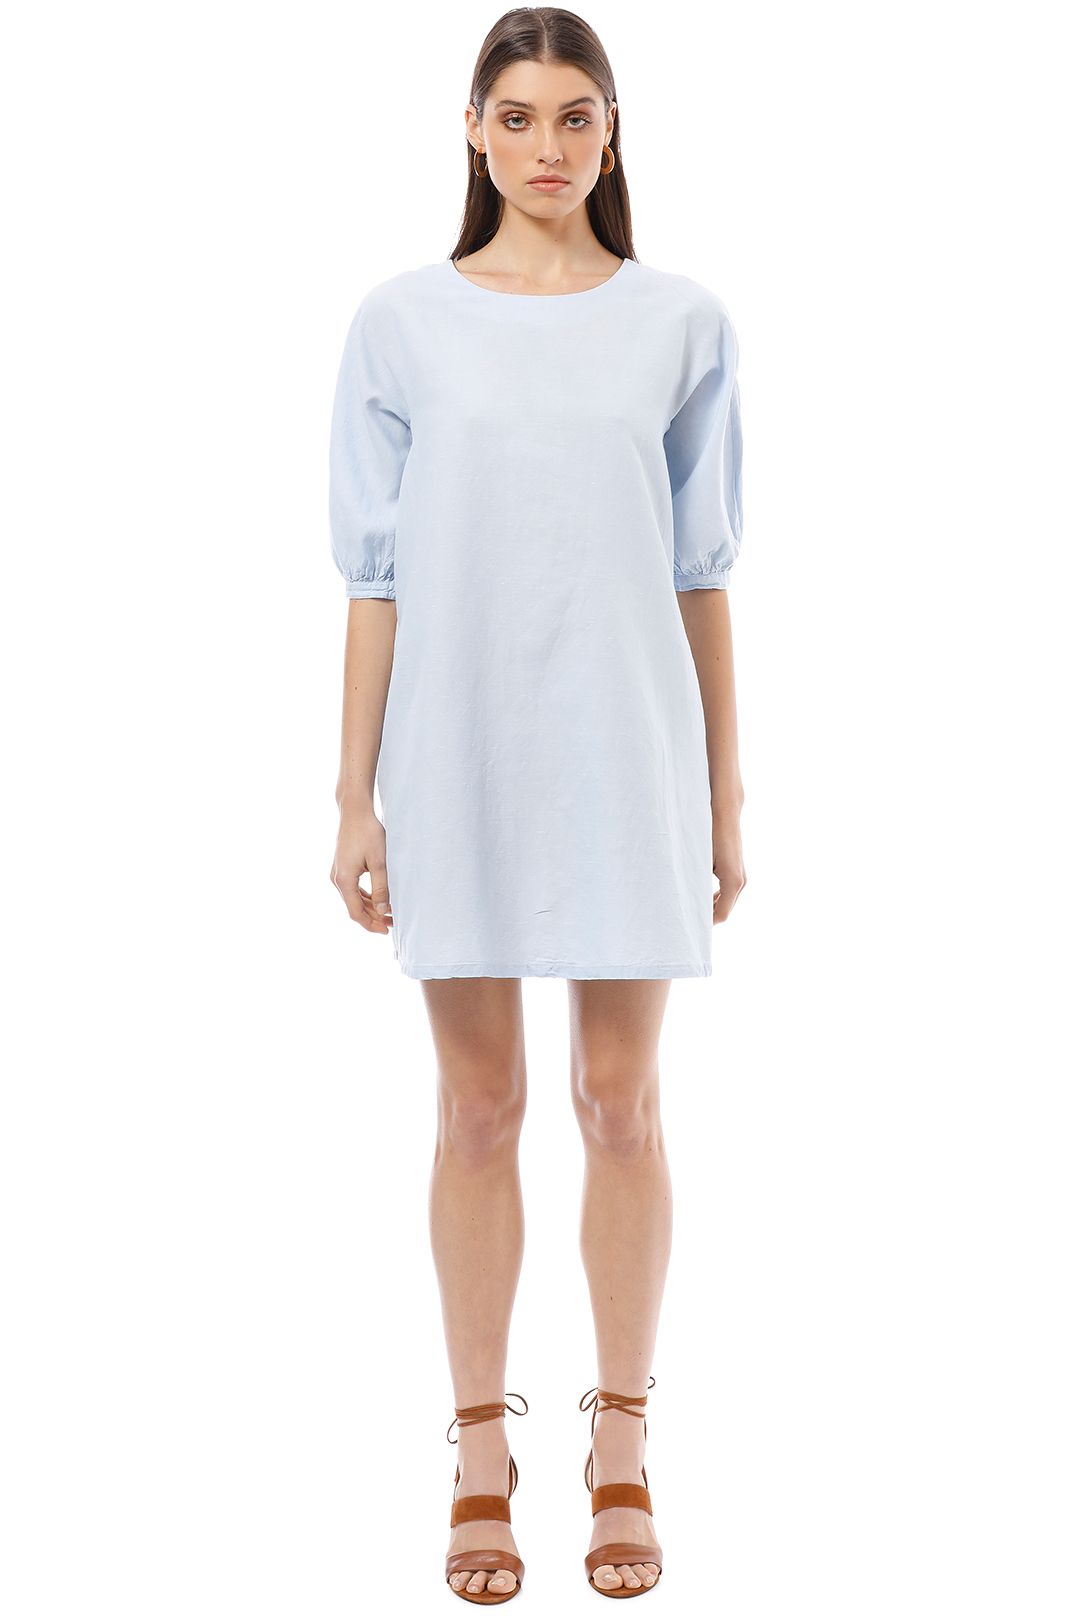 Max and Co - Delfi Dress - Blue - Front